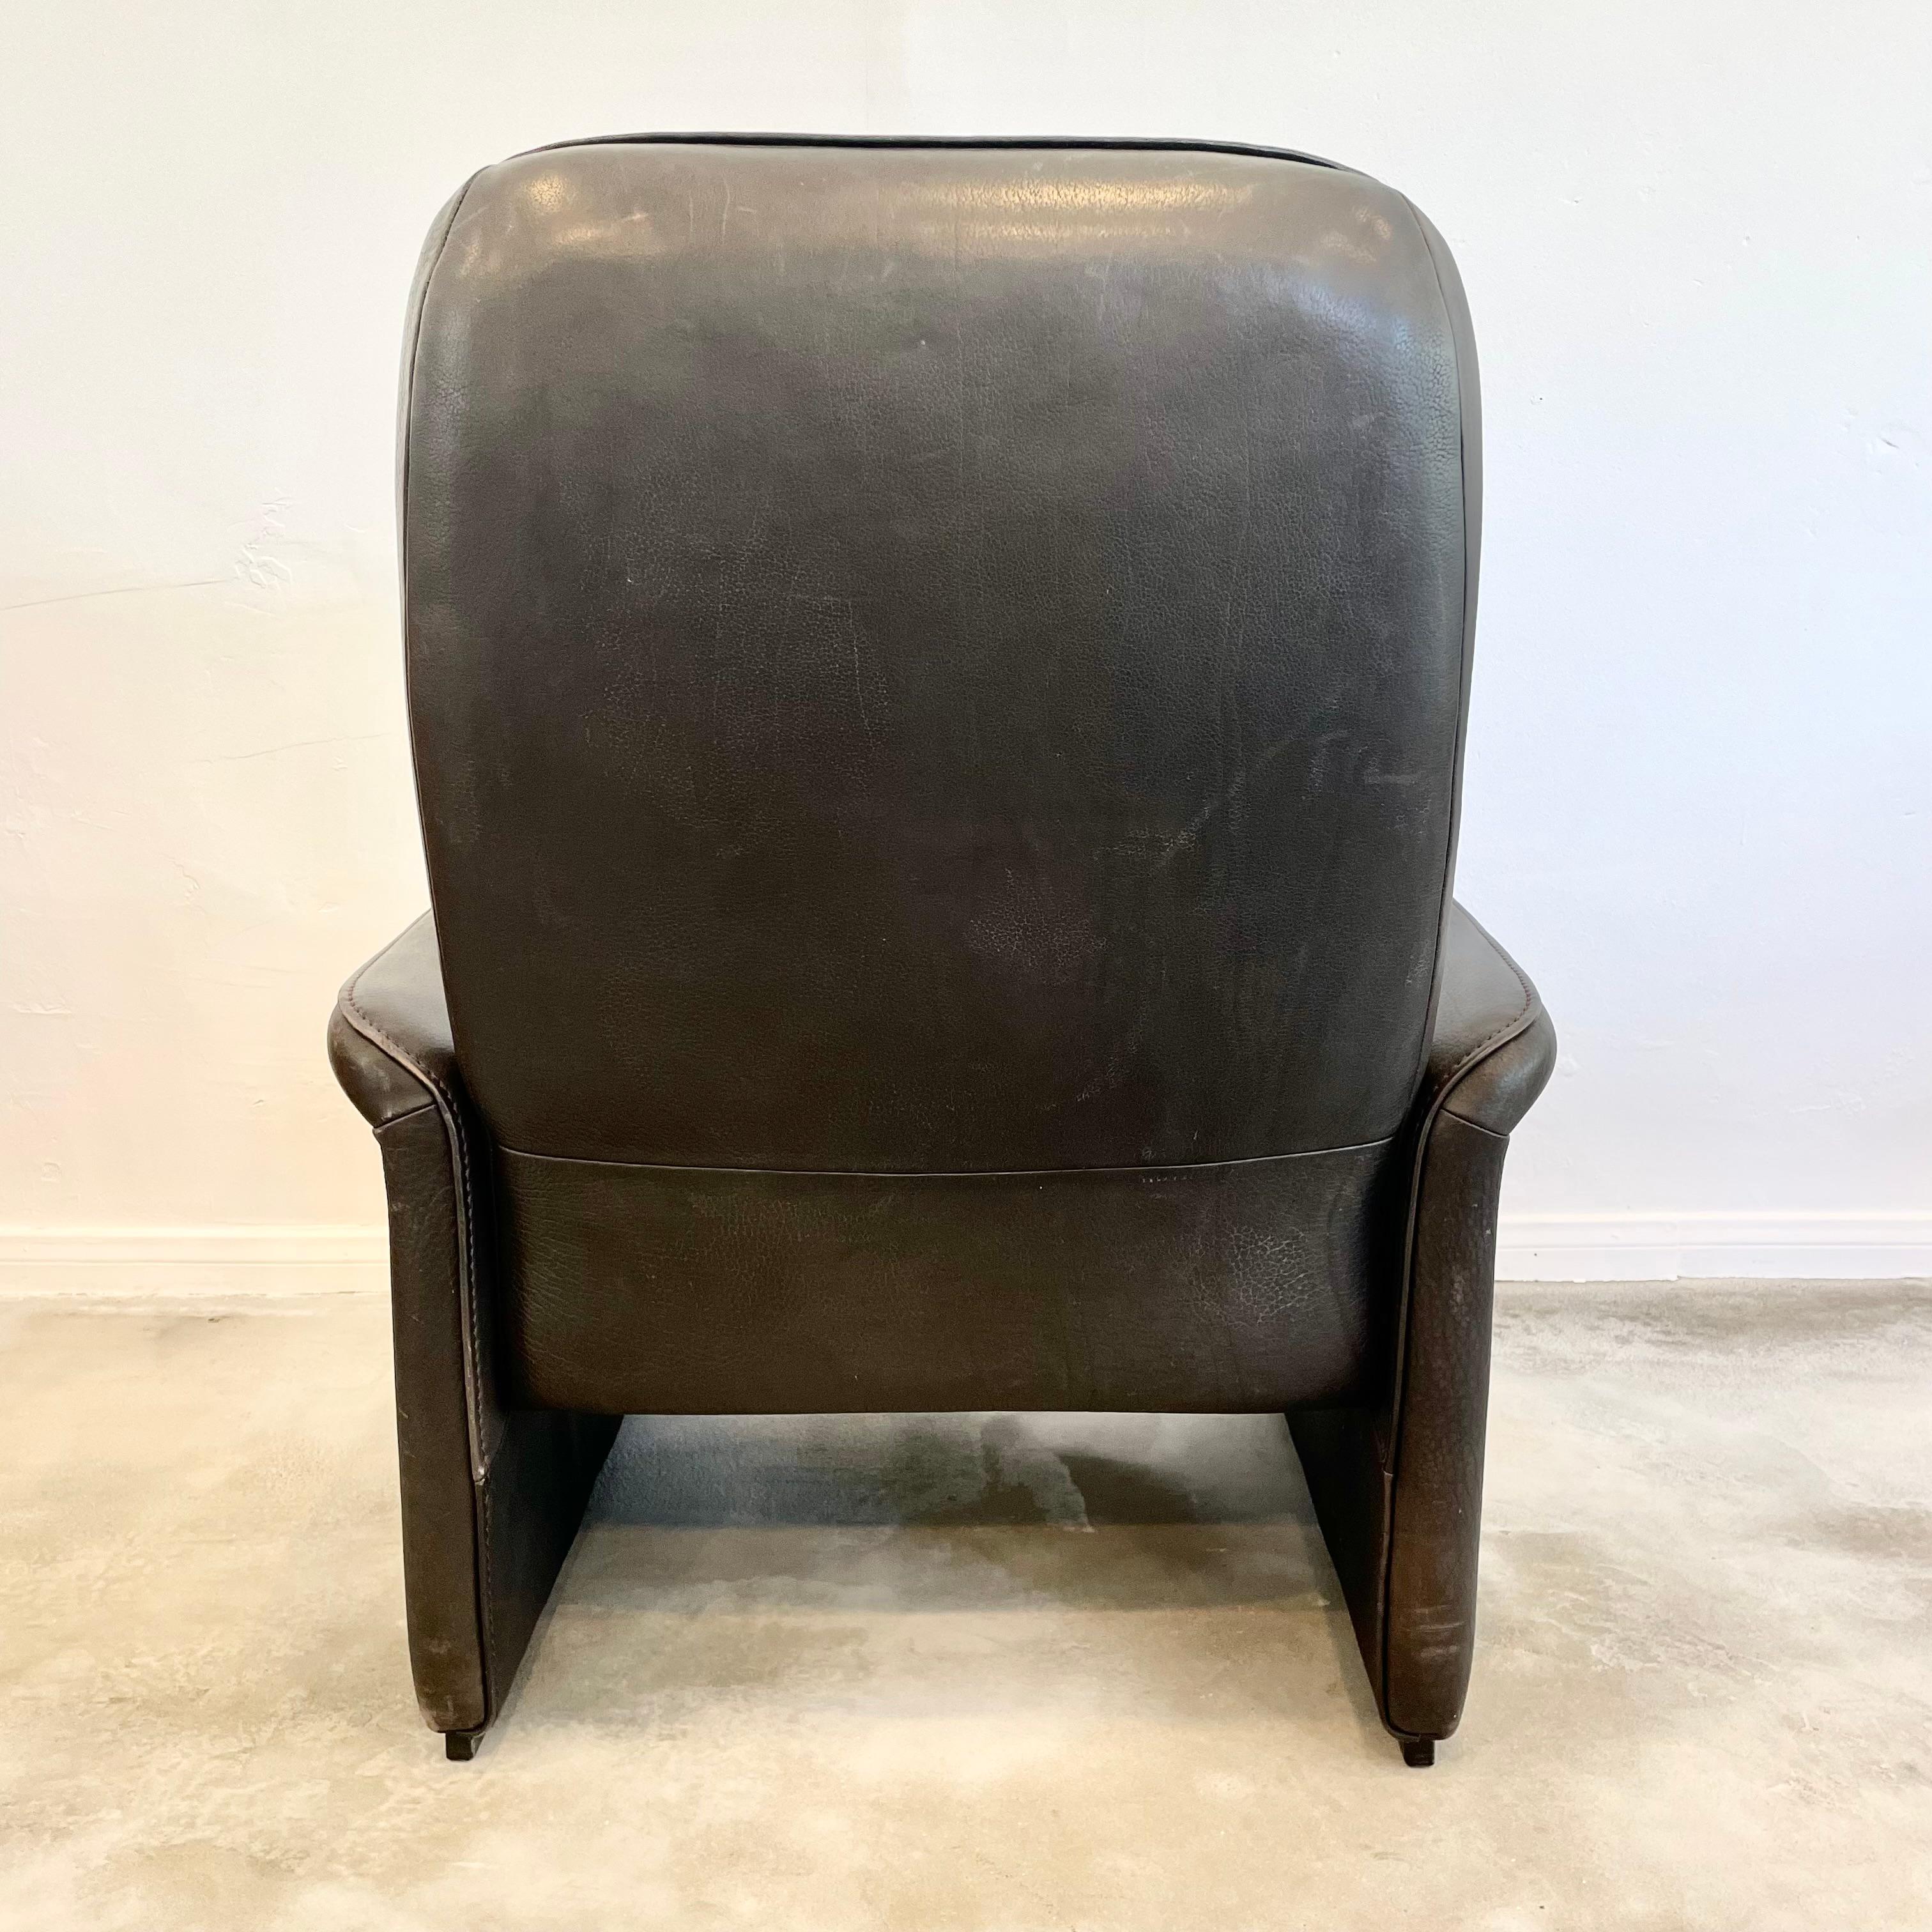 Pair of De Sede DS-50 Black Leather Recliner Chairs, 1970s Switzerland For Sale 8